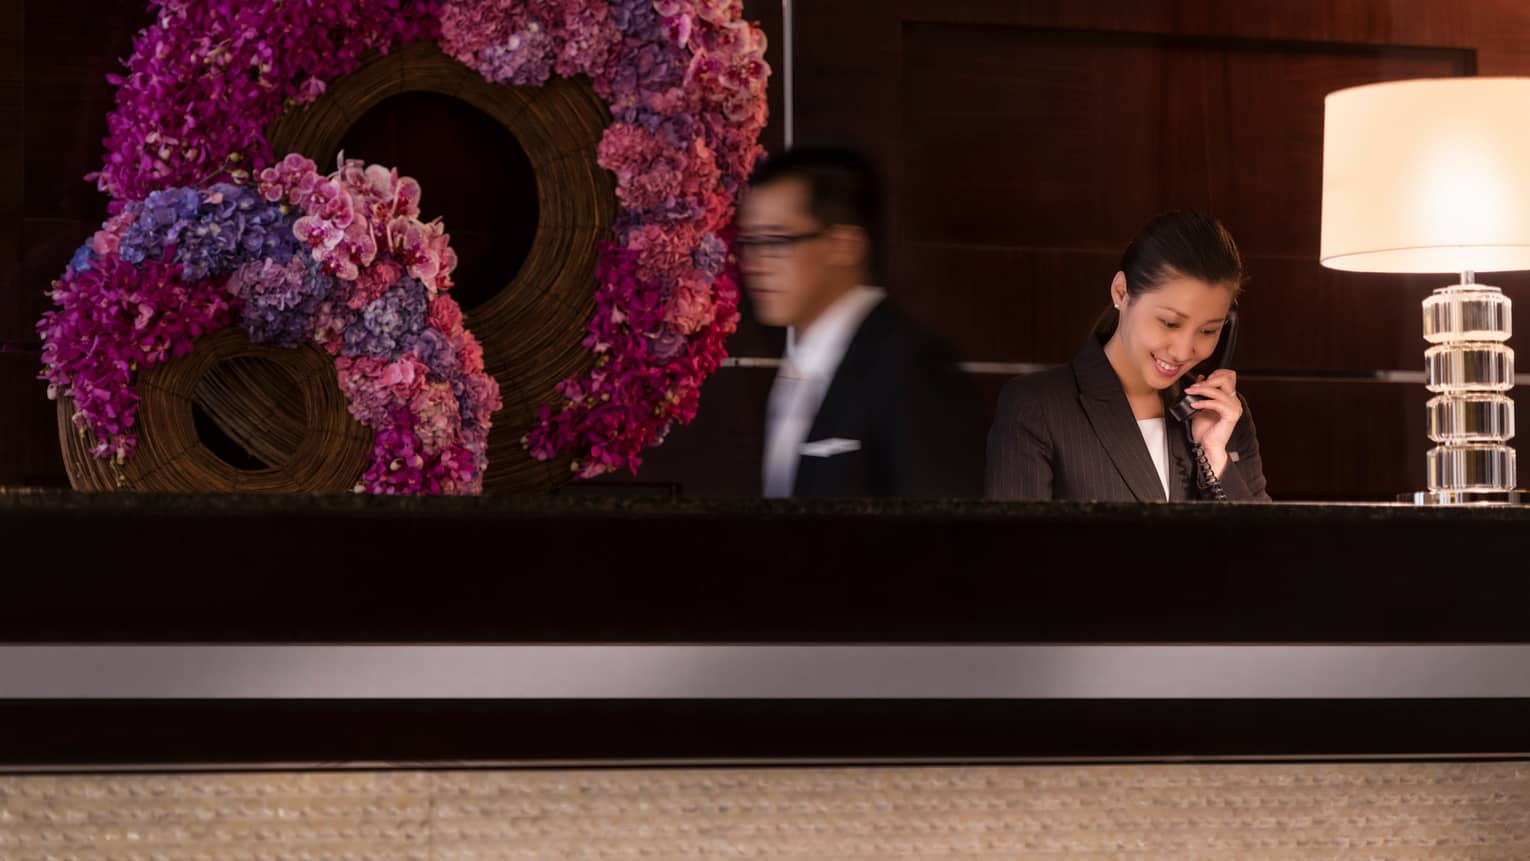 Staff at concierge desk in front of pink-and-purple floral wreaths